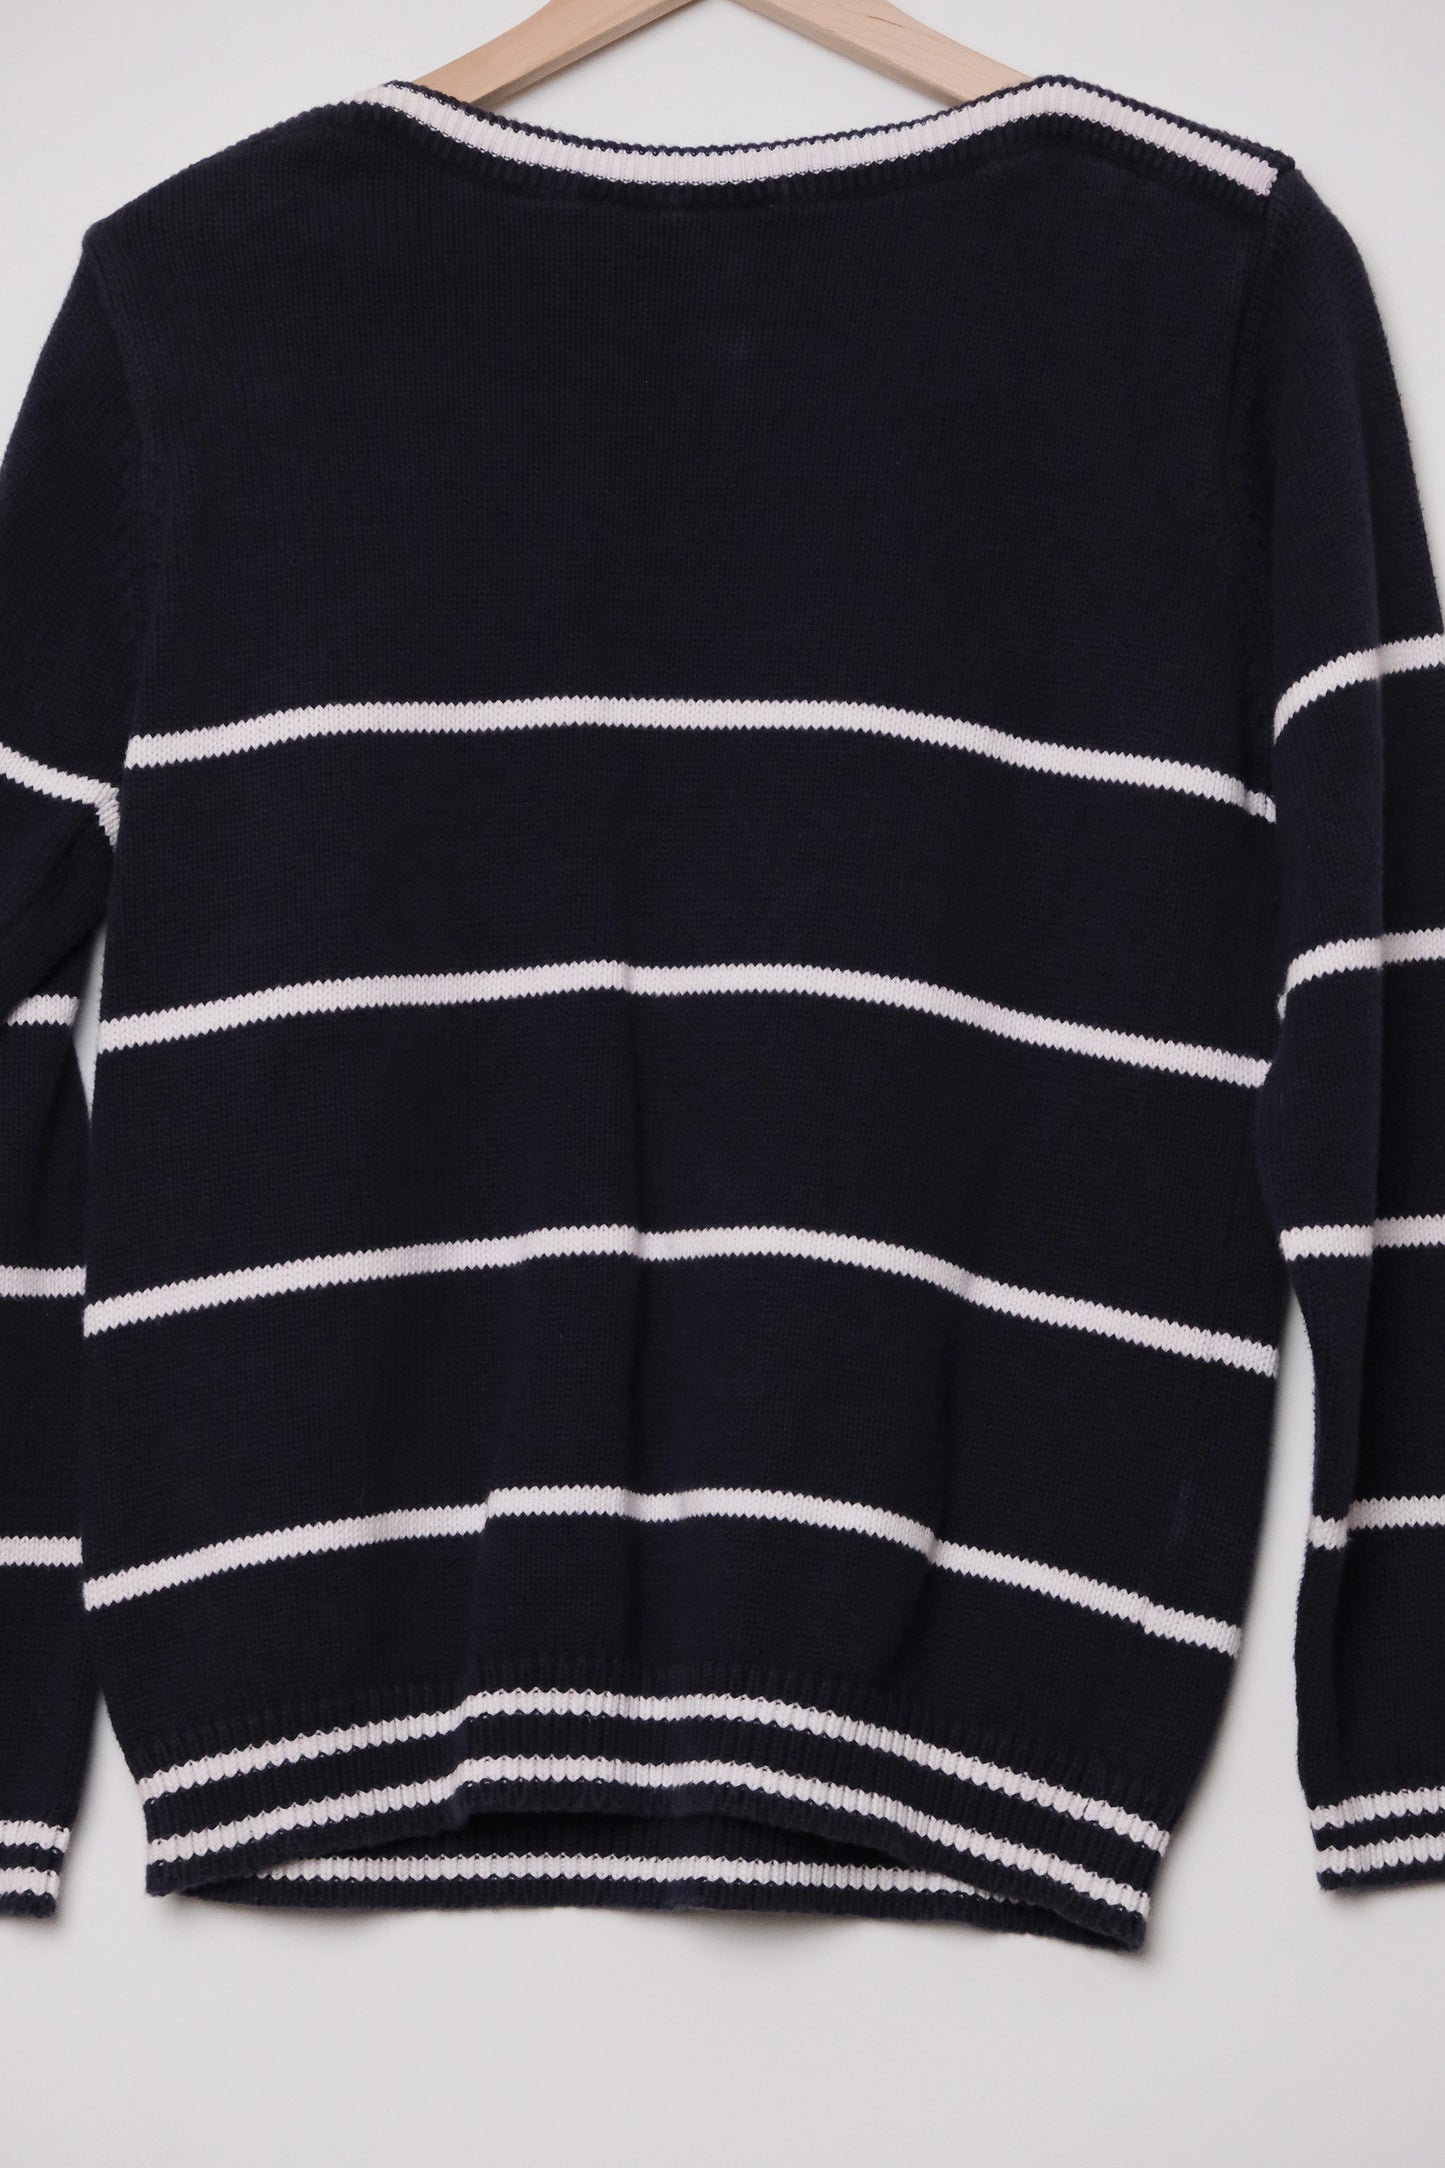 90's Navy Blue Sailor Stripe Boatneck Pullover Knit Sweater US 6, Nautical Jason Maxwell